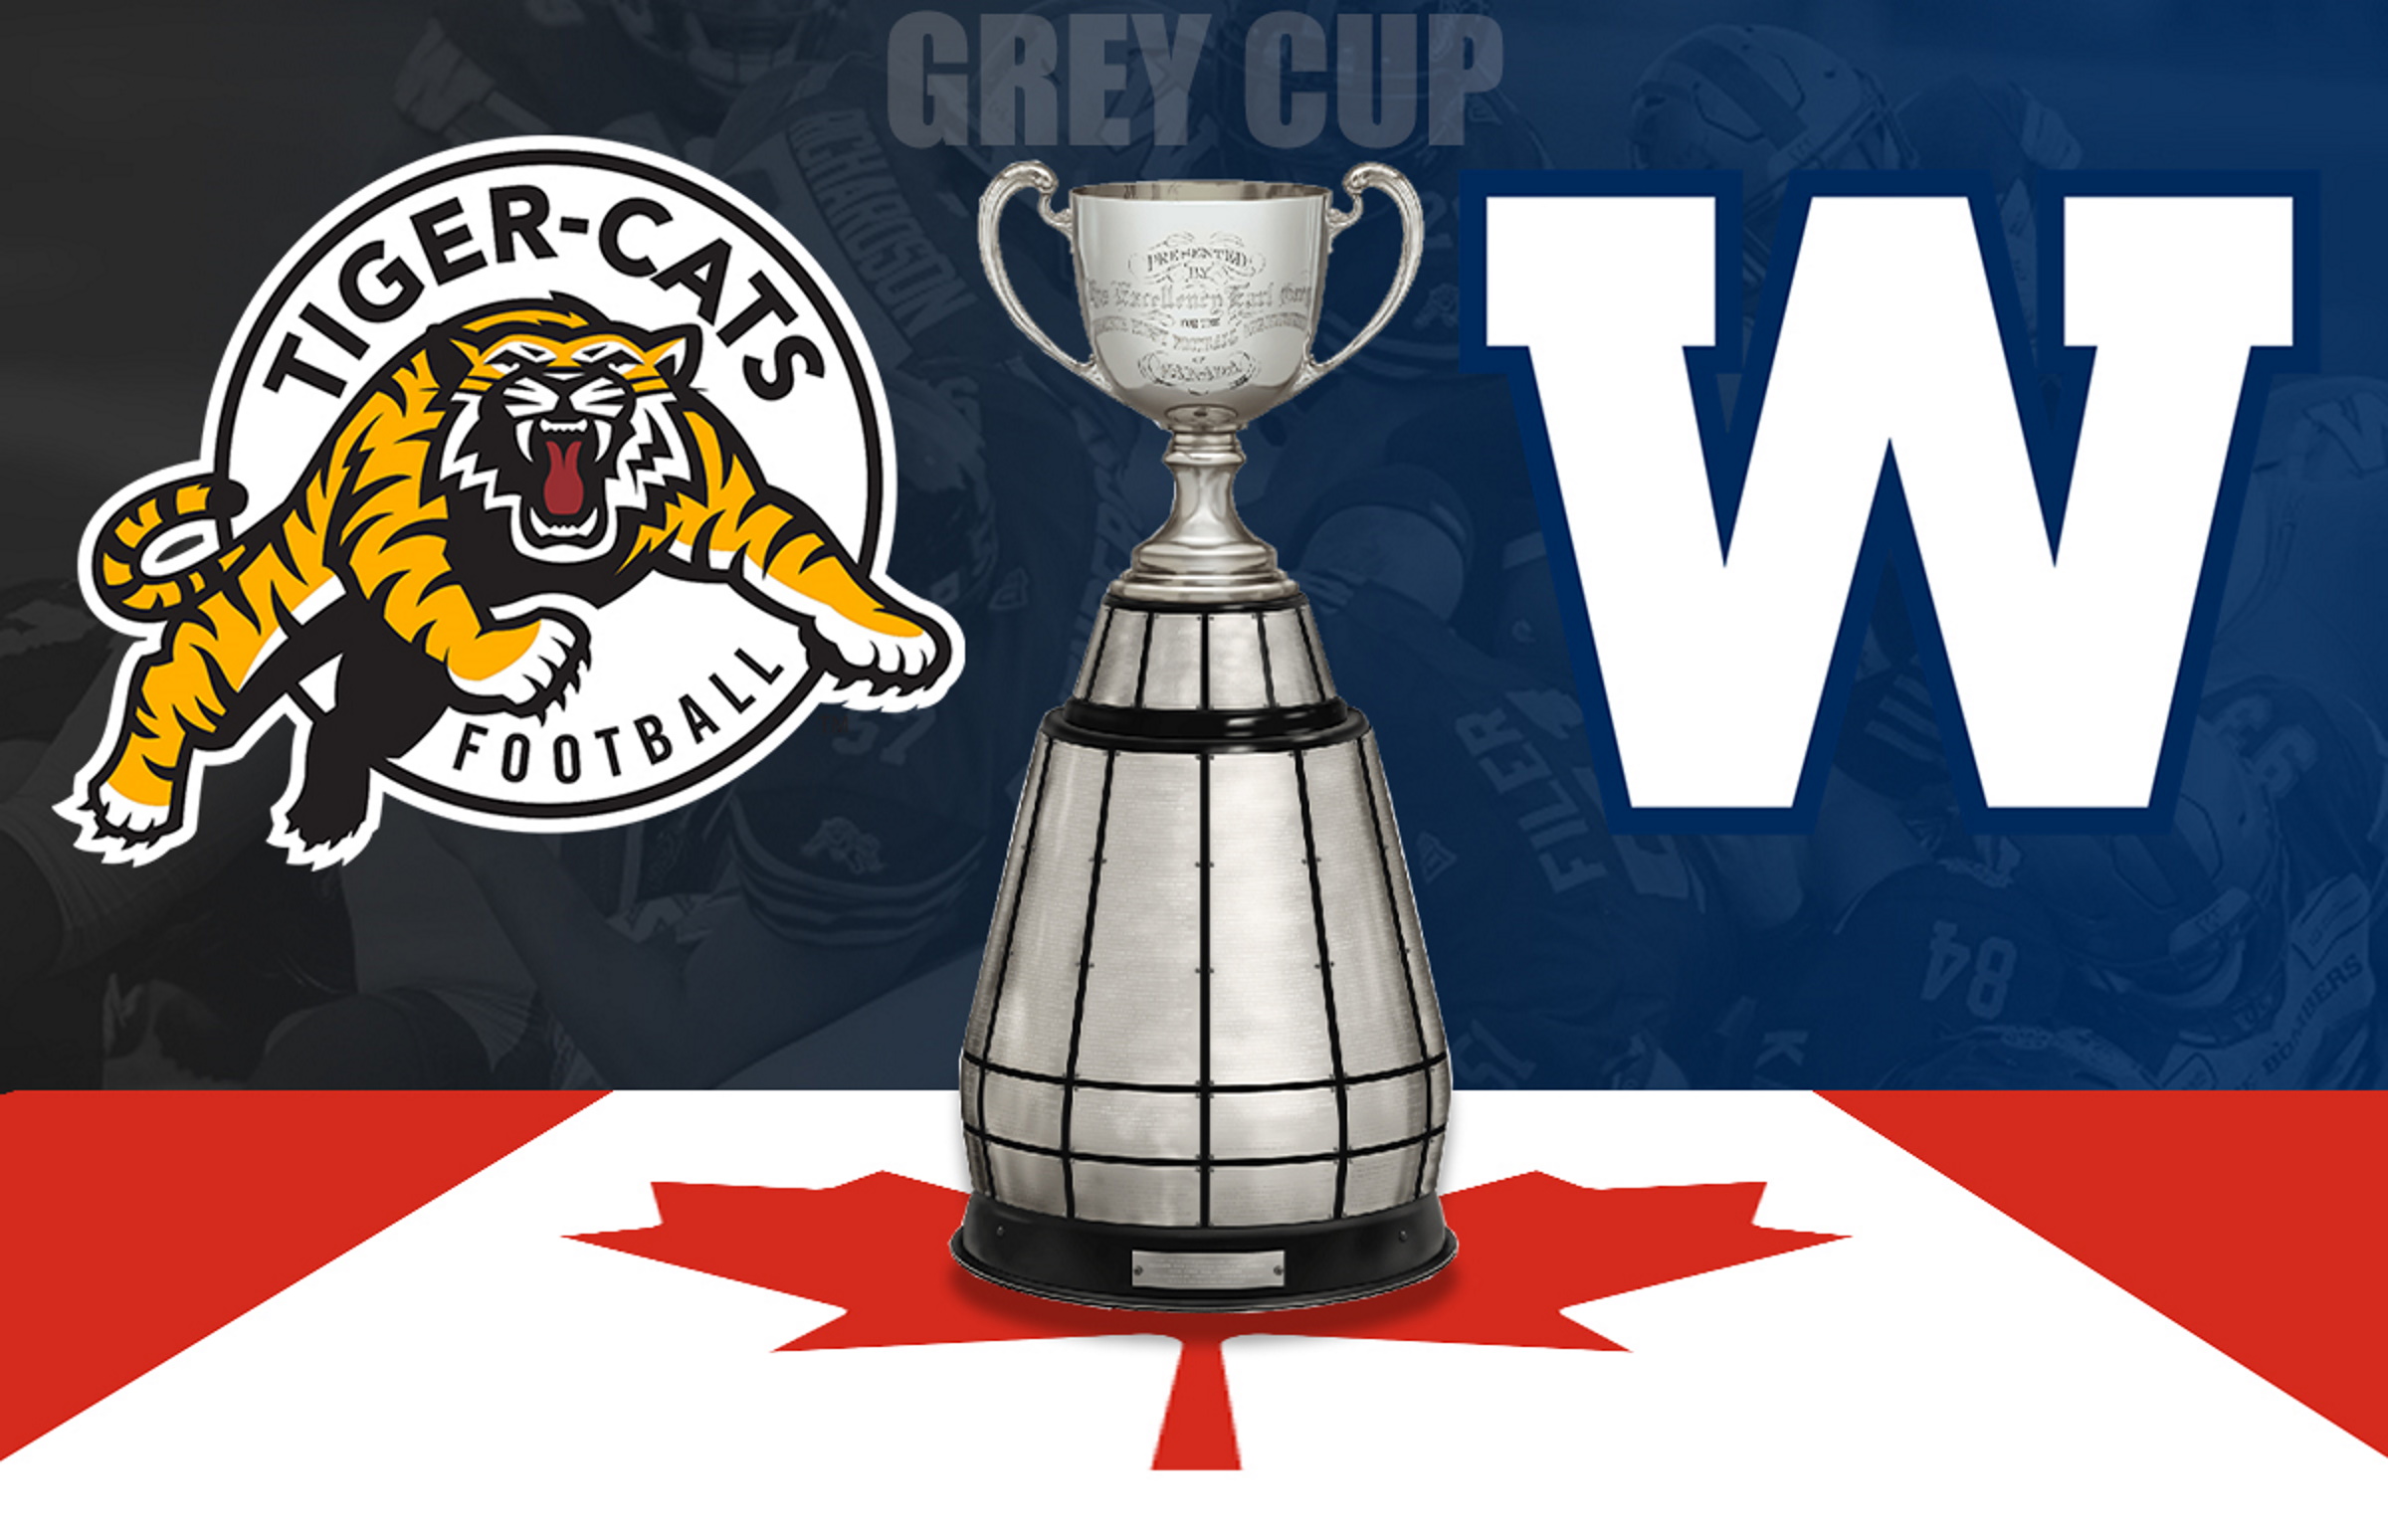 The Grey Cup is more than just Canada's Super Bowl